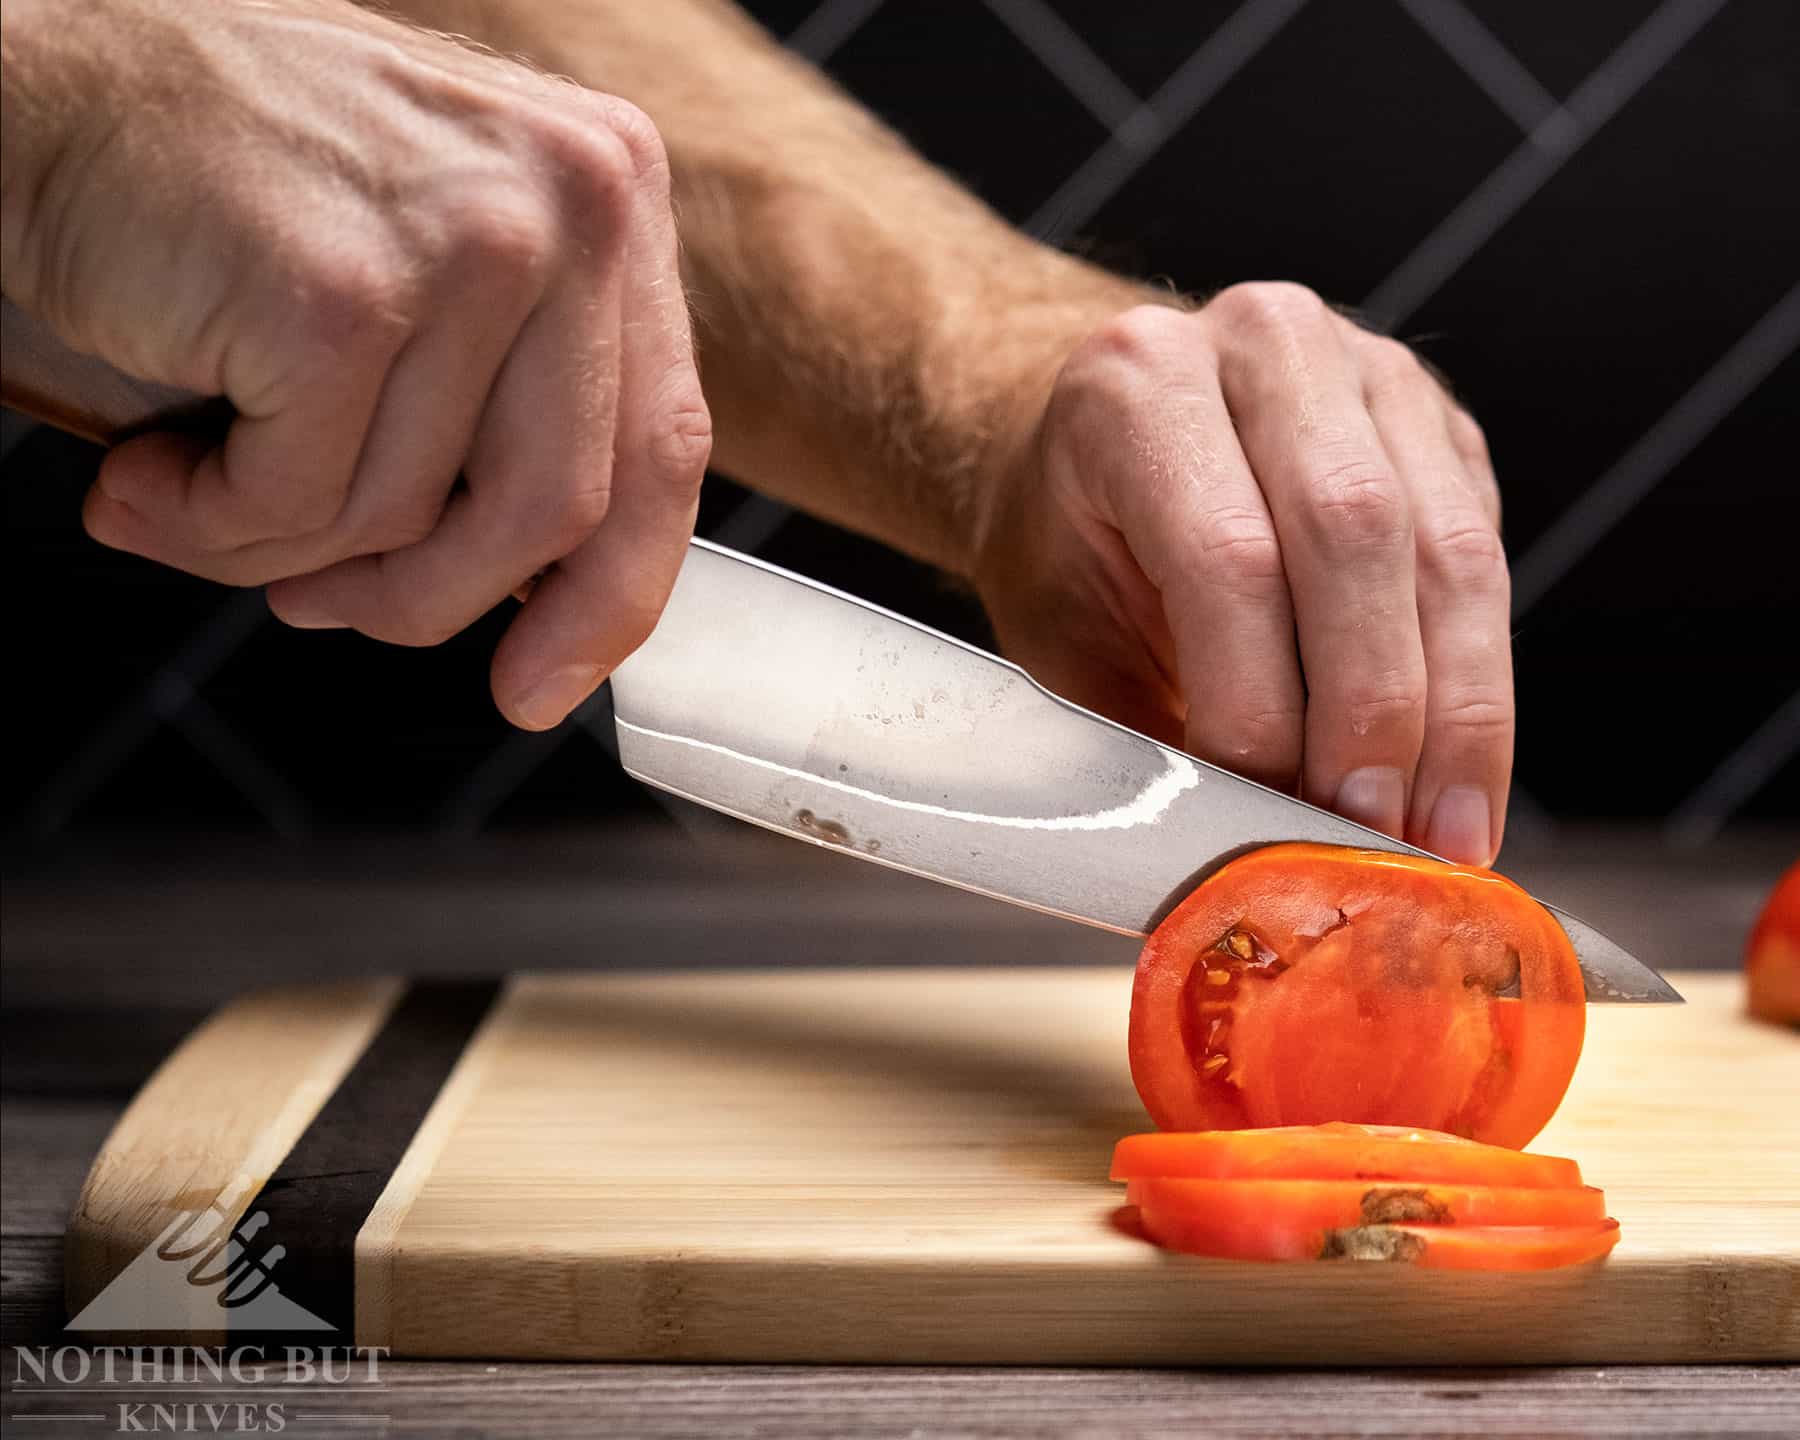 The XinCraft 8.4 inch petty chef knife looks like a Gyuto style chef knife, but it cuts more like a Western style chef knife.